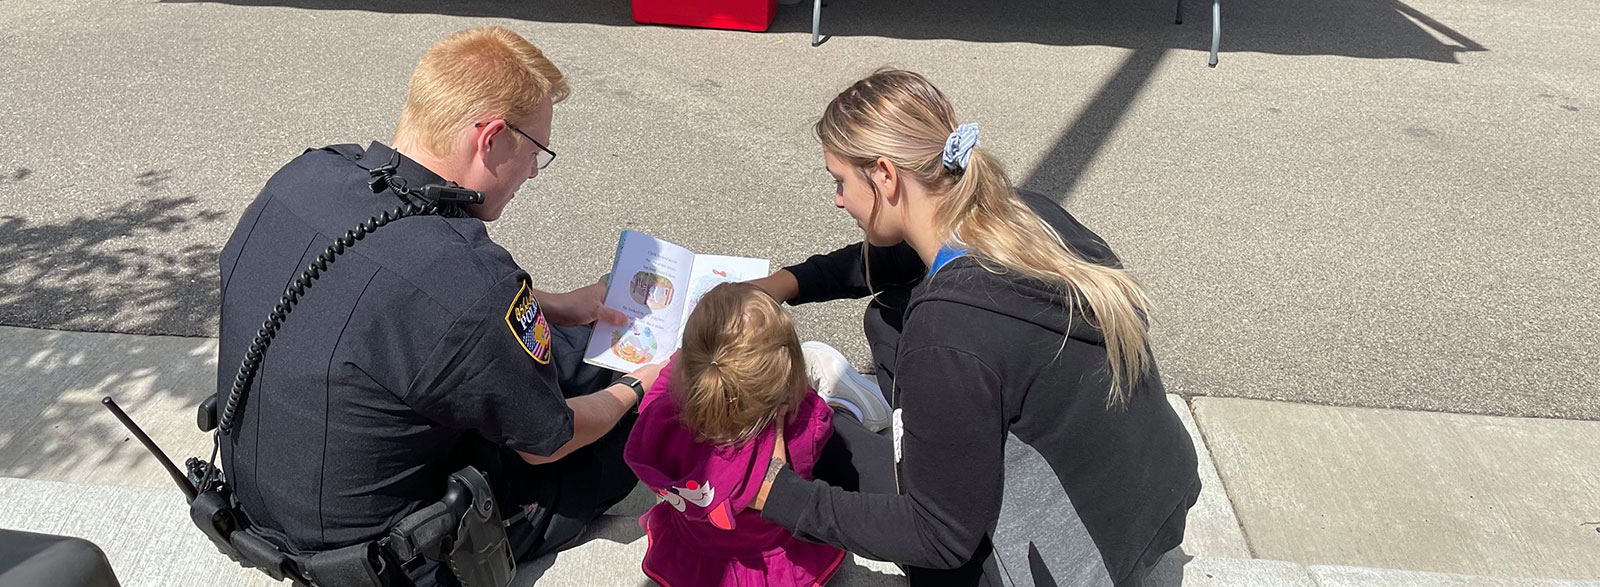 Officers high fiving citizens at a community event